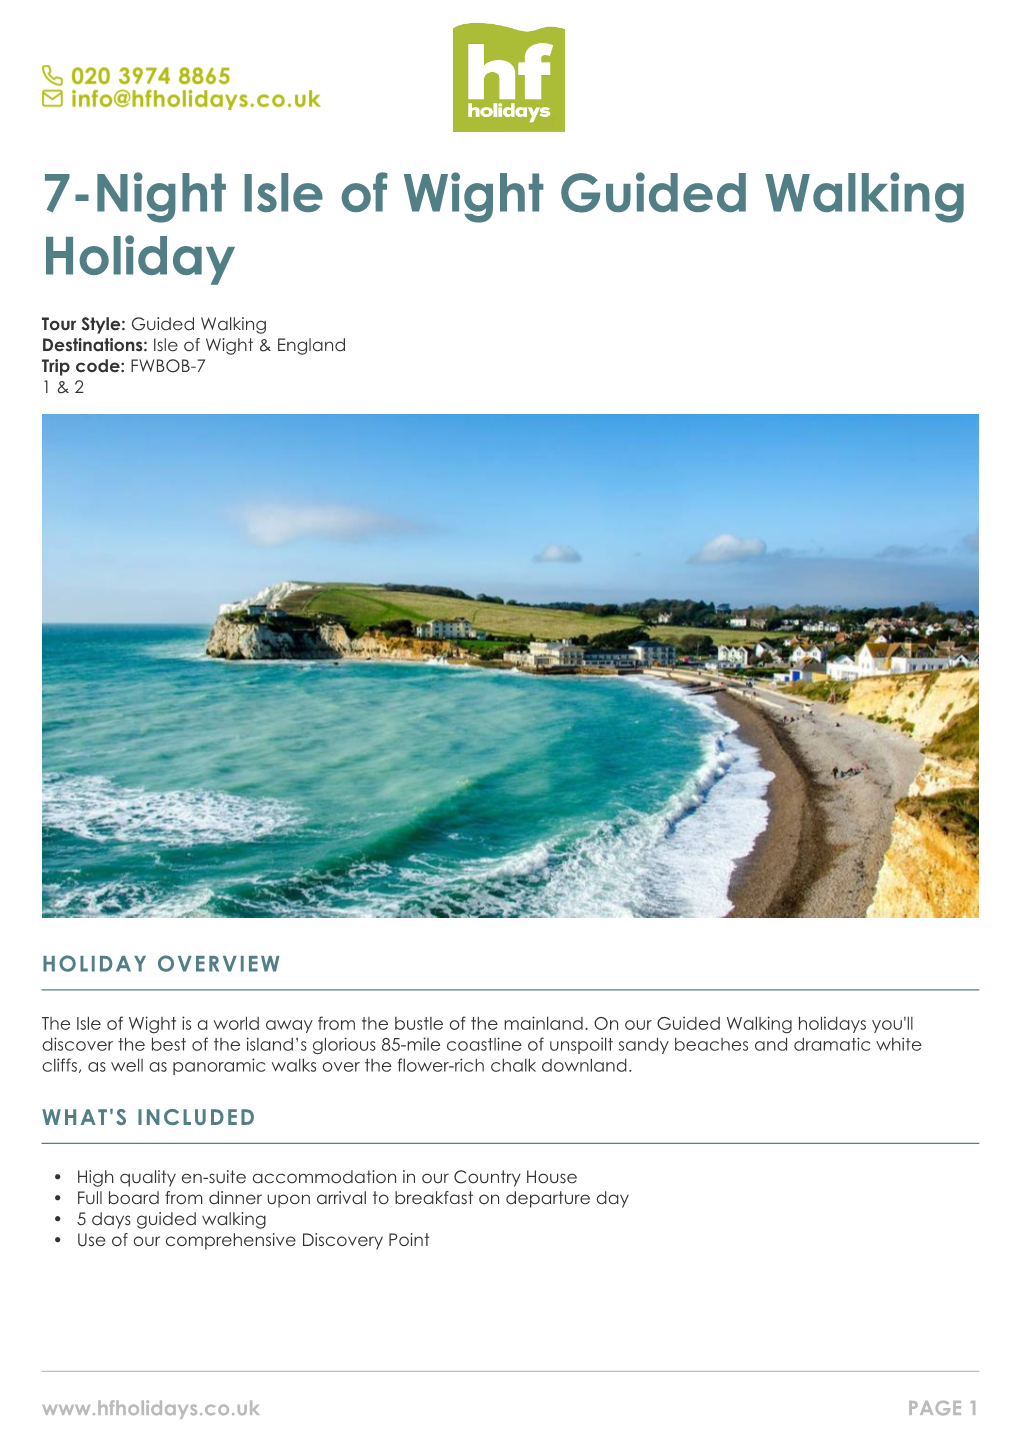 7-Night Isle of Wight Guided Walking Holiday